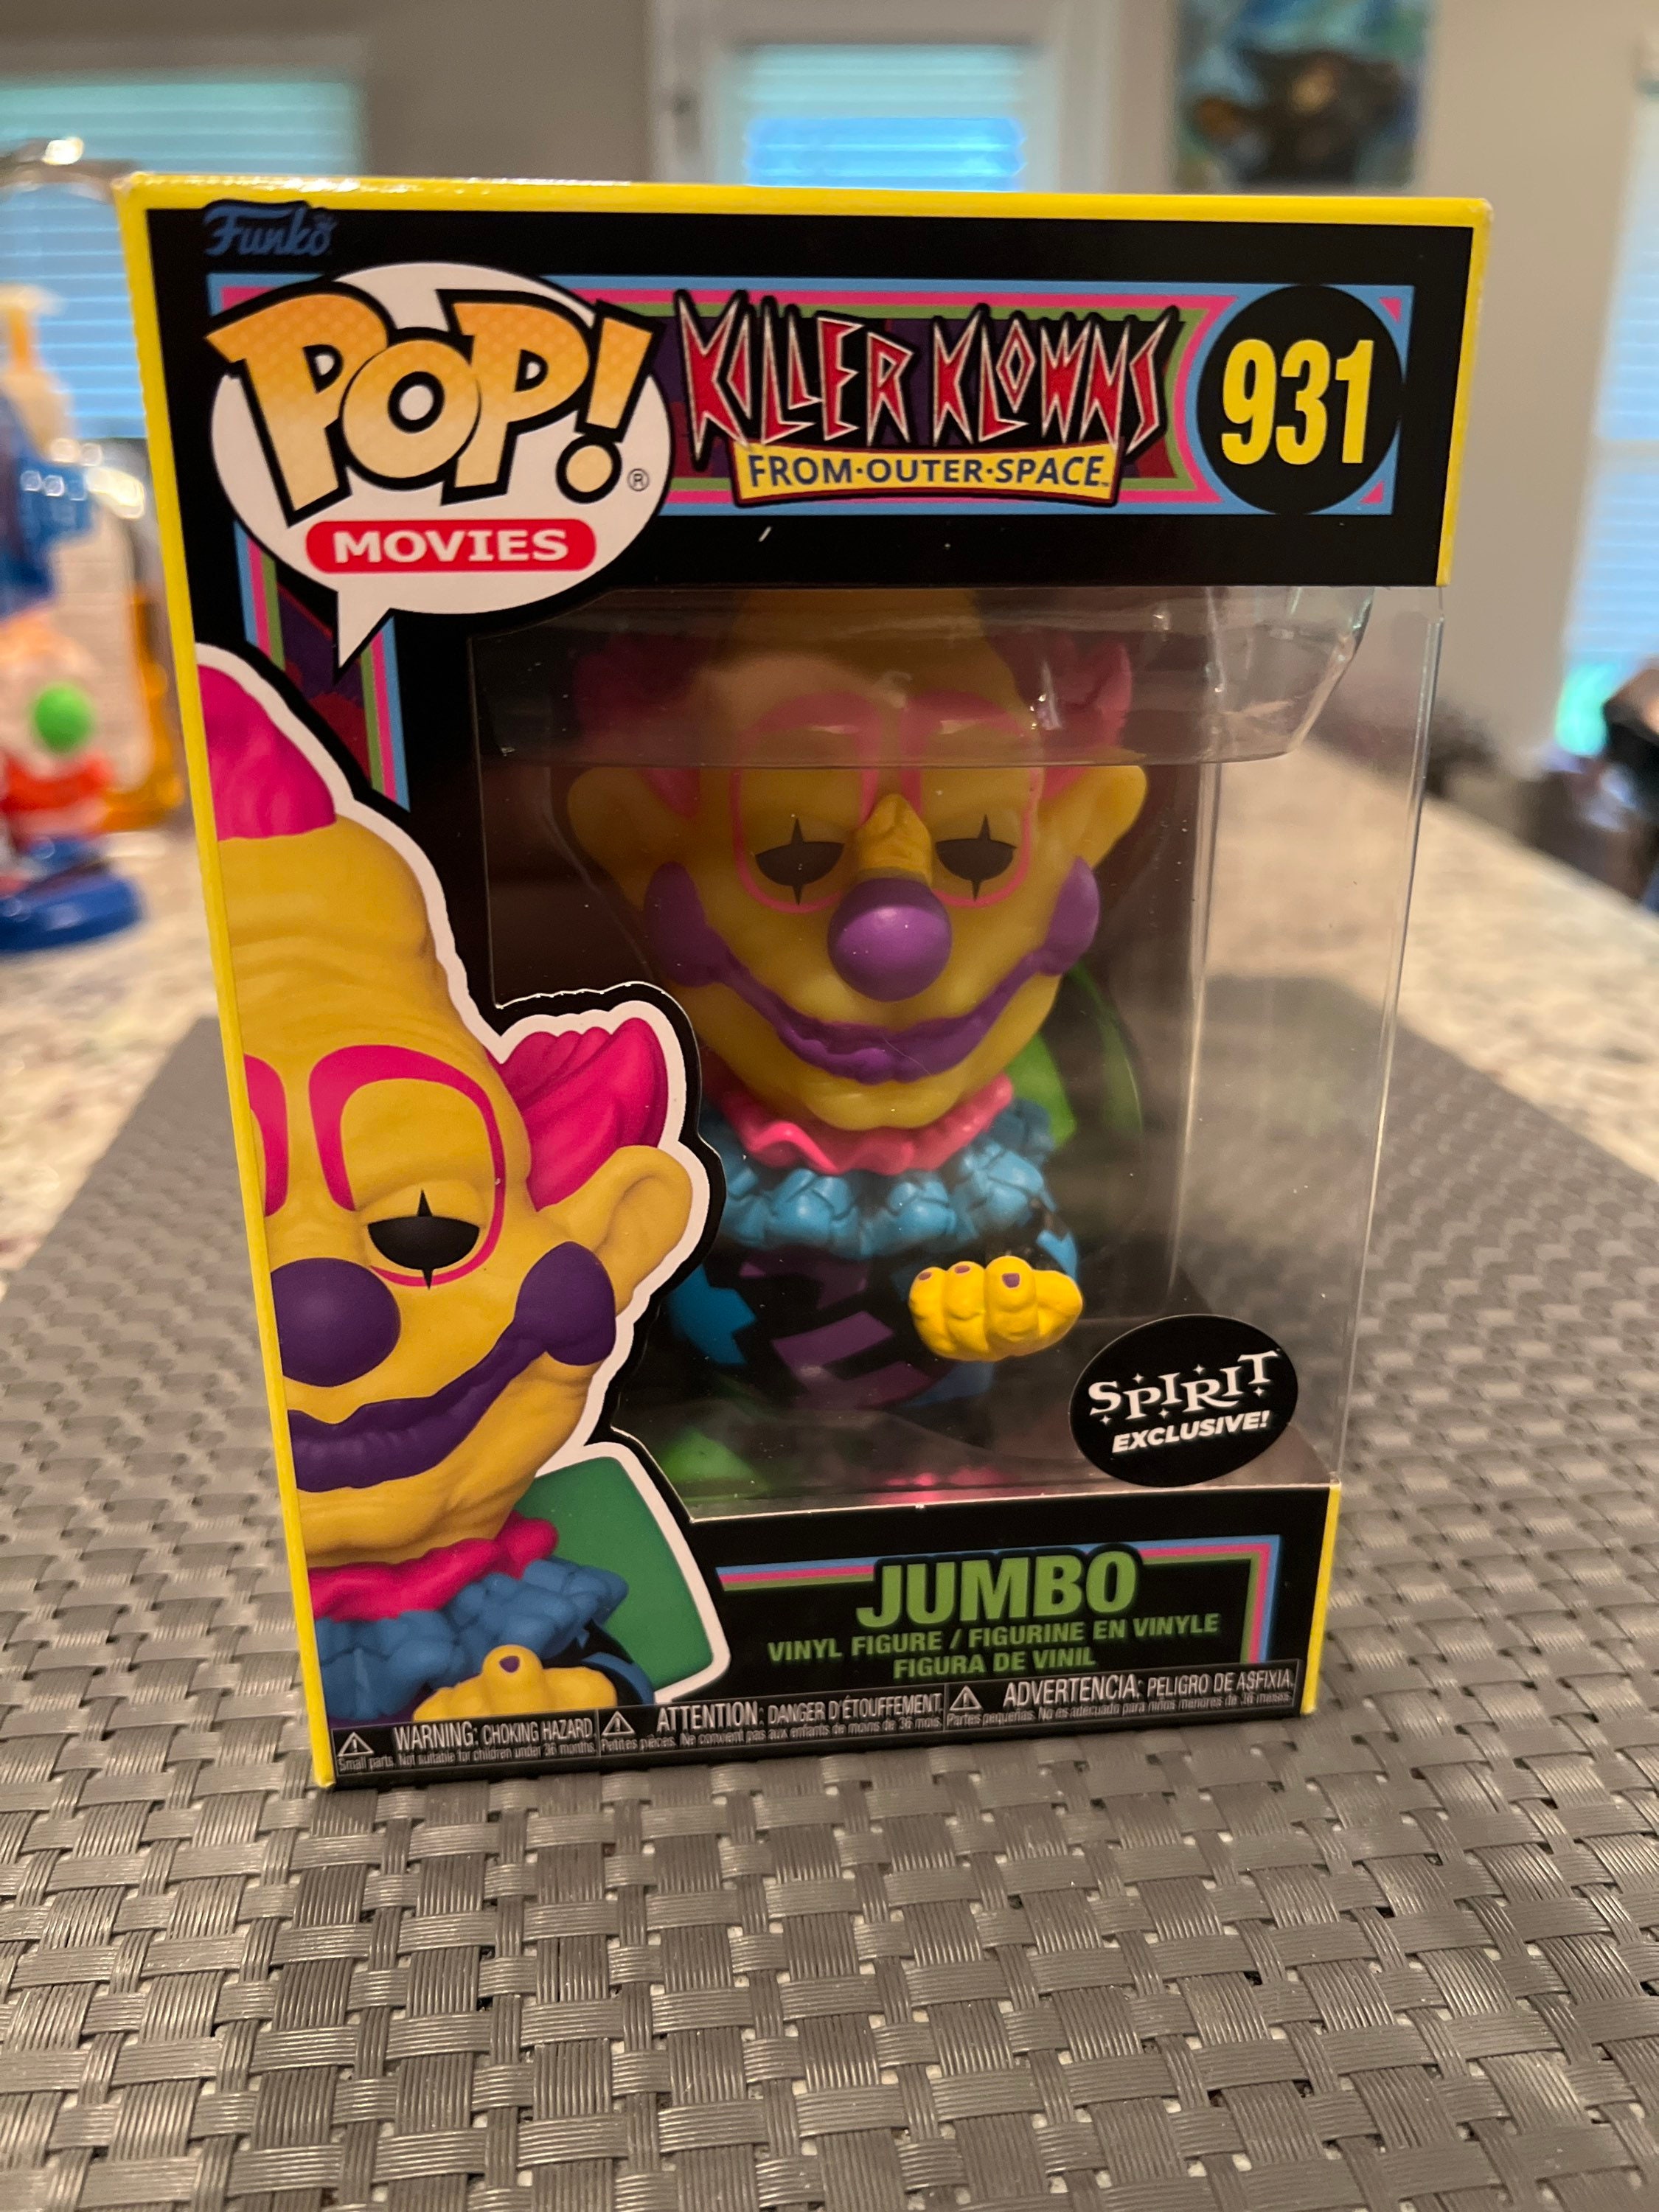 Killer Klowns From Outer Space Jumbo Blacklight Spirit Halloween Exclusive  Figure #931 - NYCeFISHING